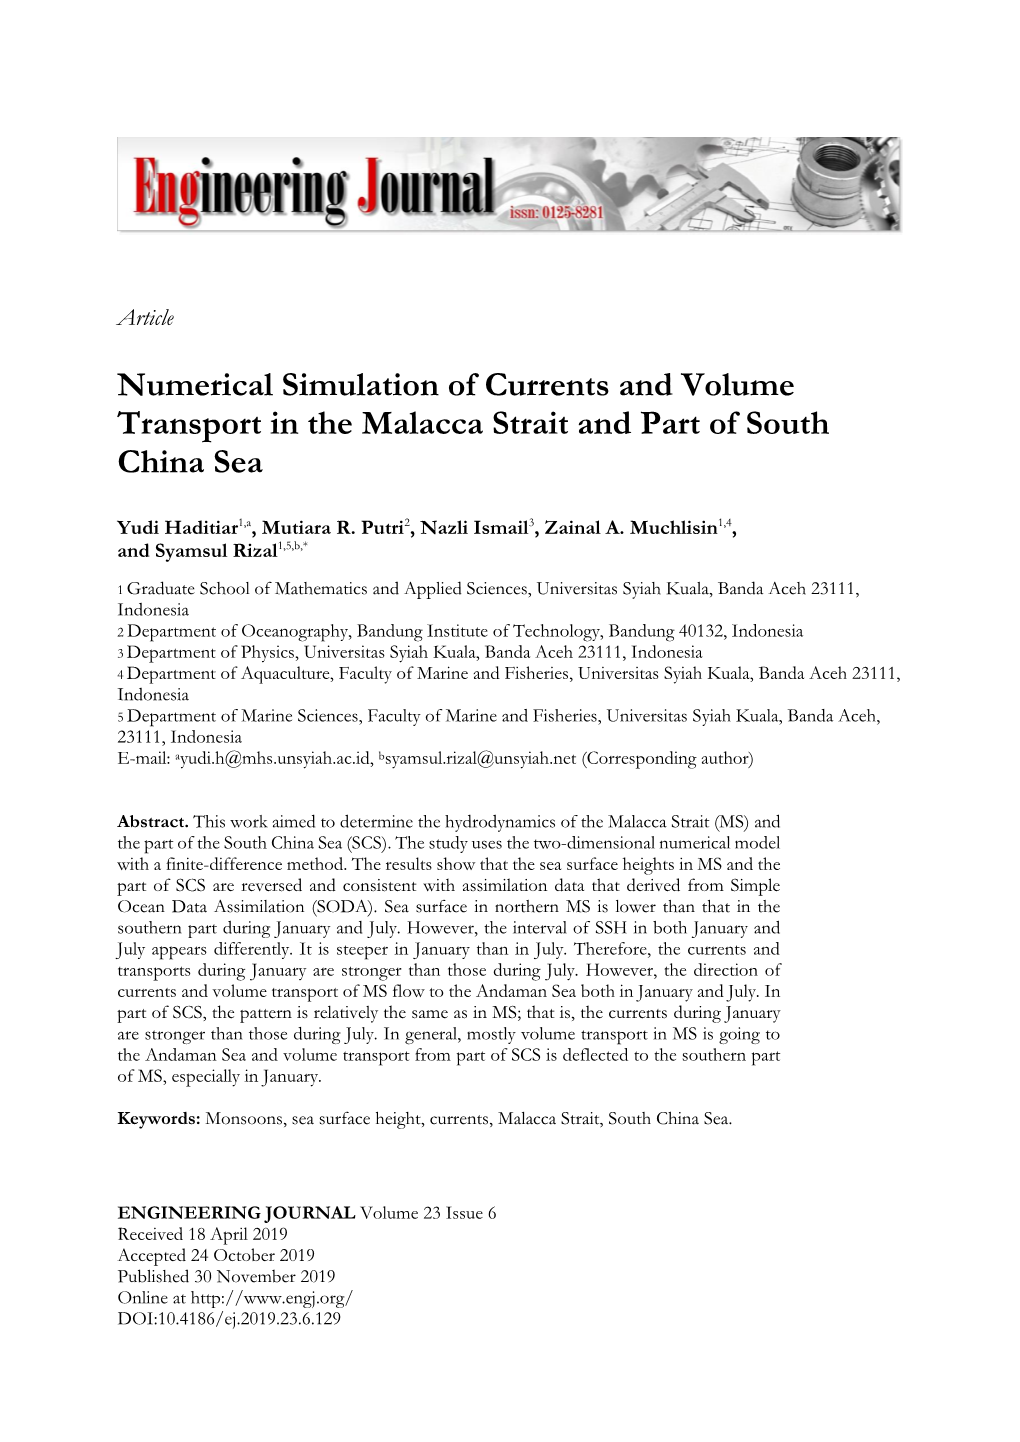 Numerical Simulation of Currents and Volume Transport in the Malacca Strait and Part of South China Sea